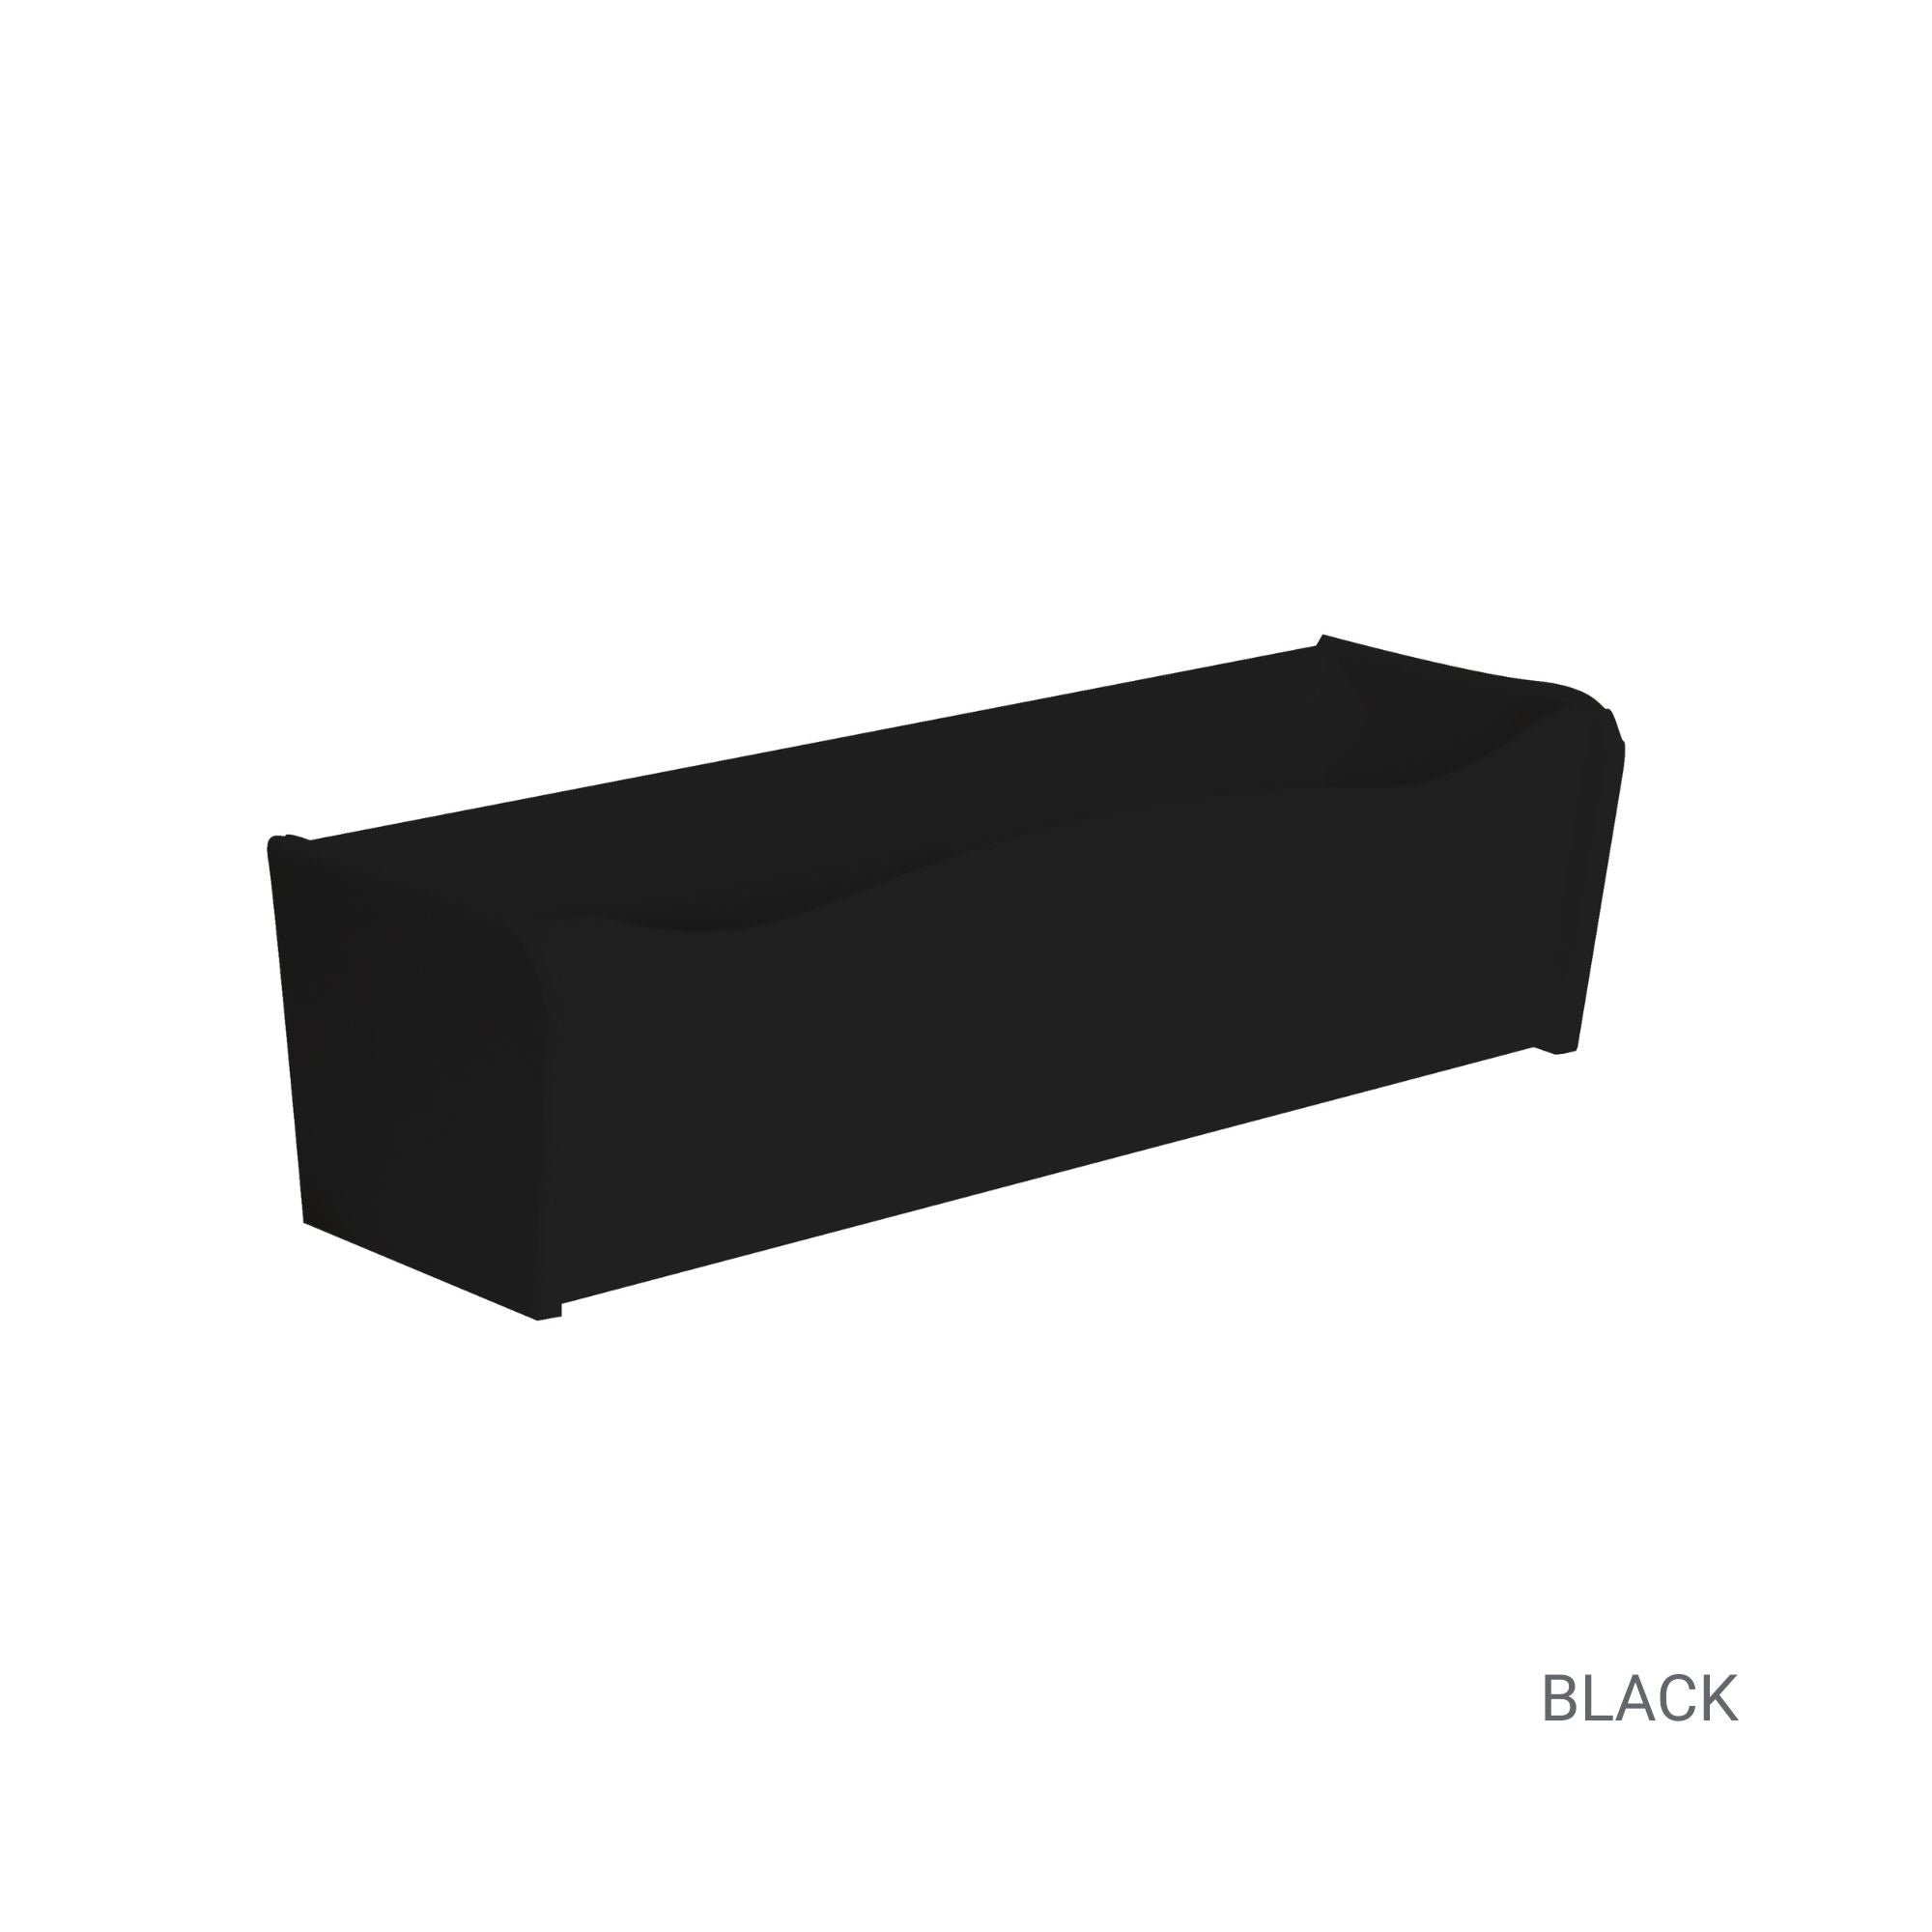 18" x 6" x 5" Black Flower Box for Window Sills, Sheds, Playhouses, and MORE